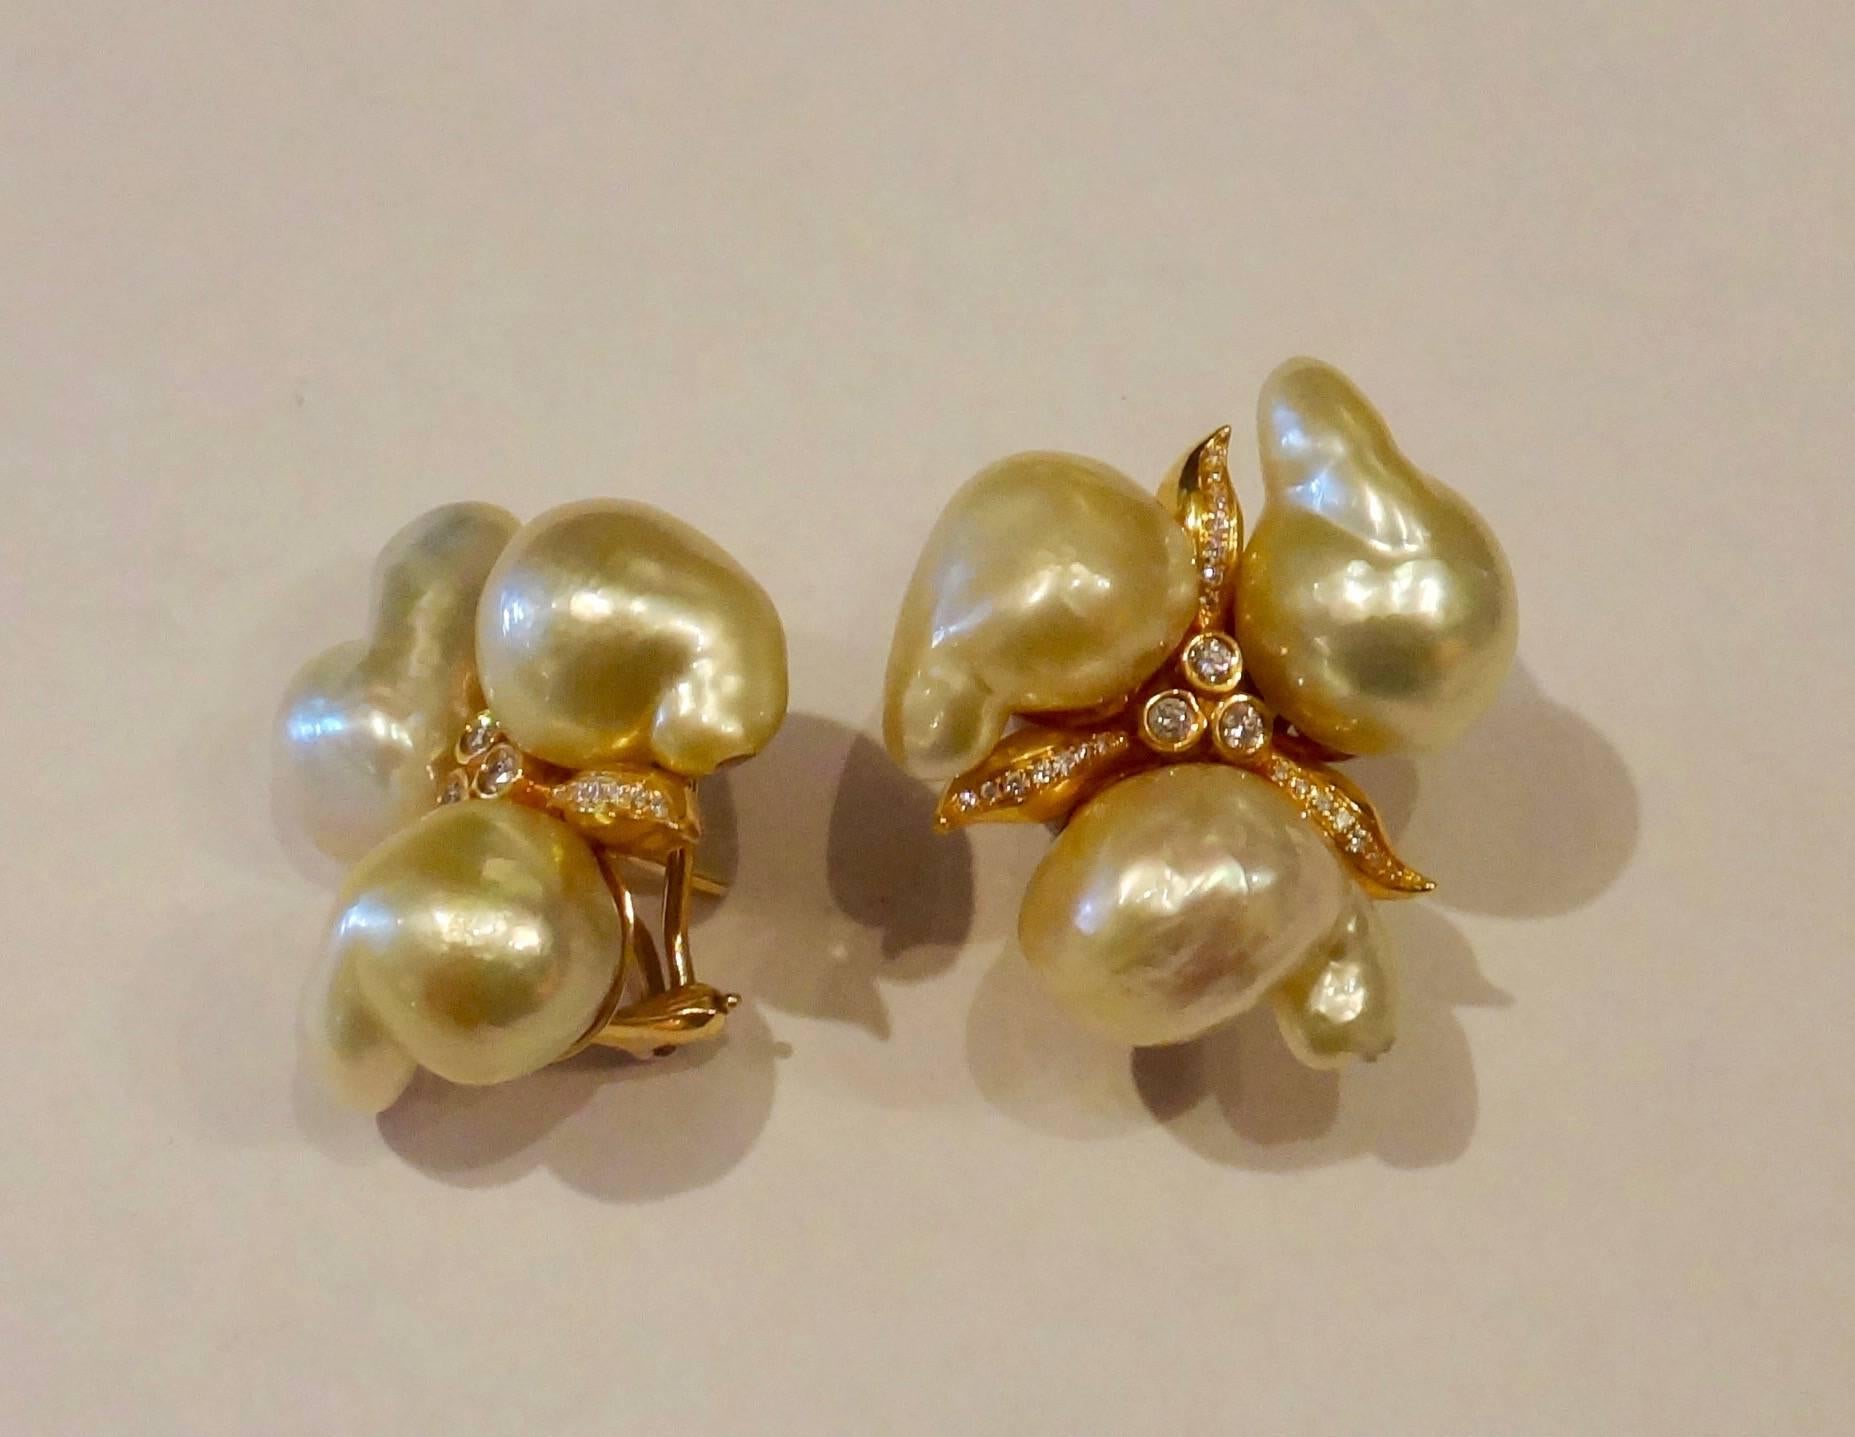 Very baroque Maluka pearls (Origin: Borneo) are combined with bezel set and pave set diamonds in these bold, one-of-a-kind cluster earrings.  The pearls have lovely shades and tones of white, gray and gold and possess great luster.  The earrings